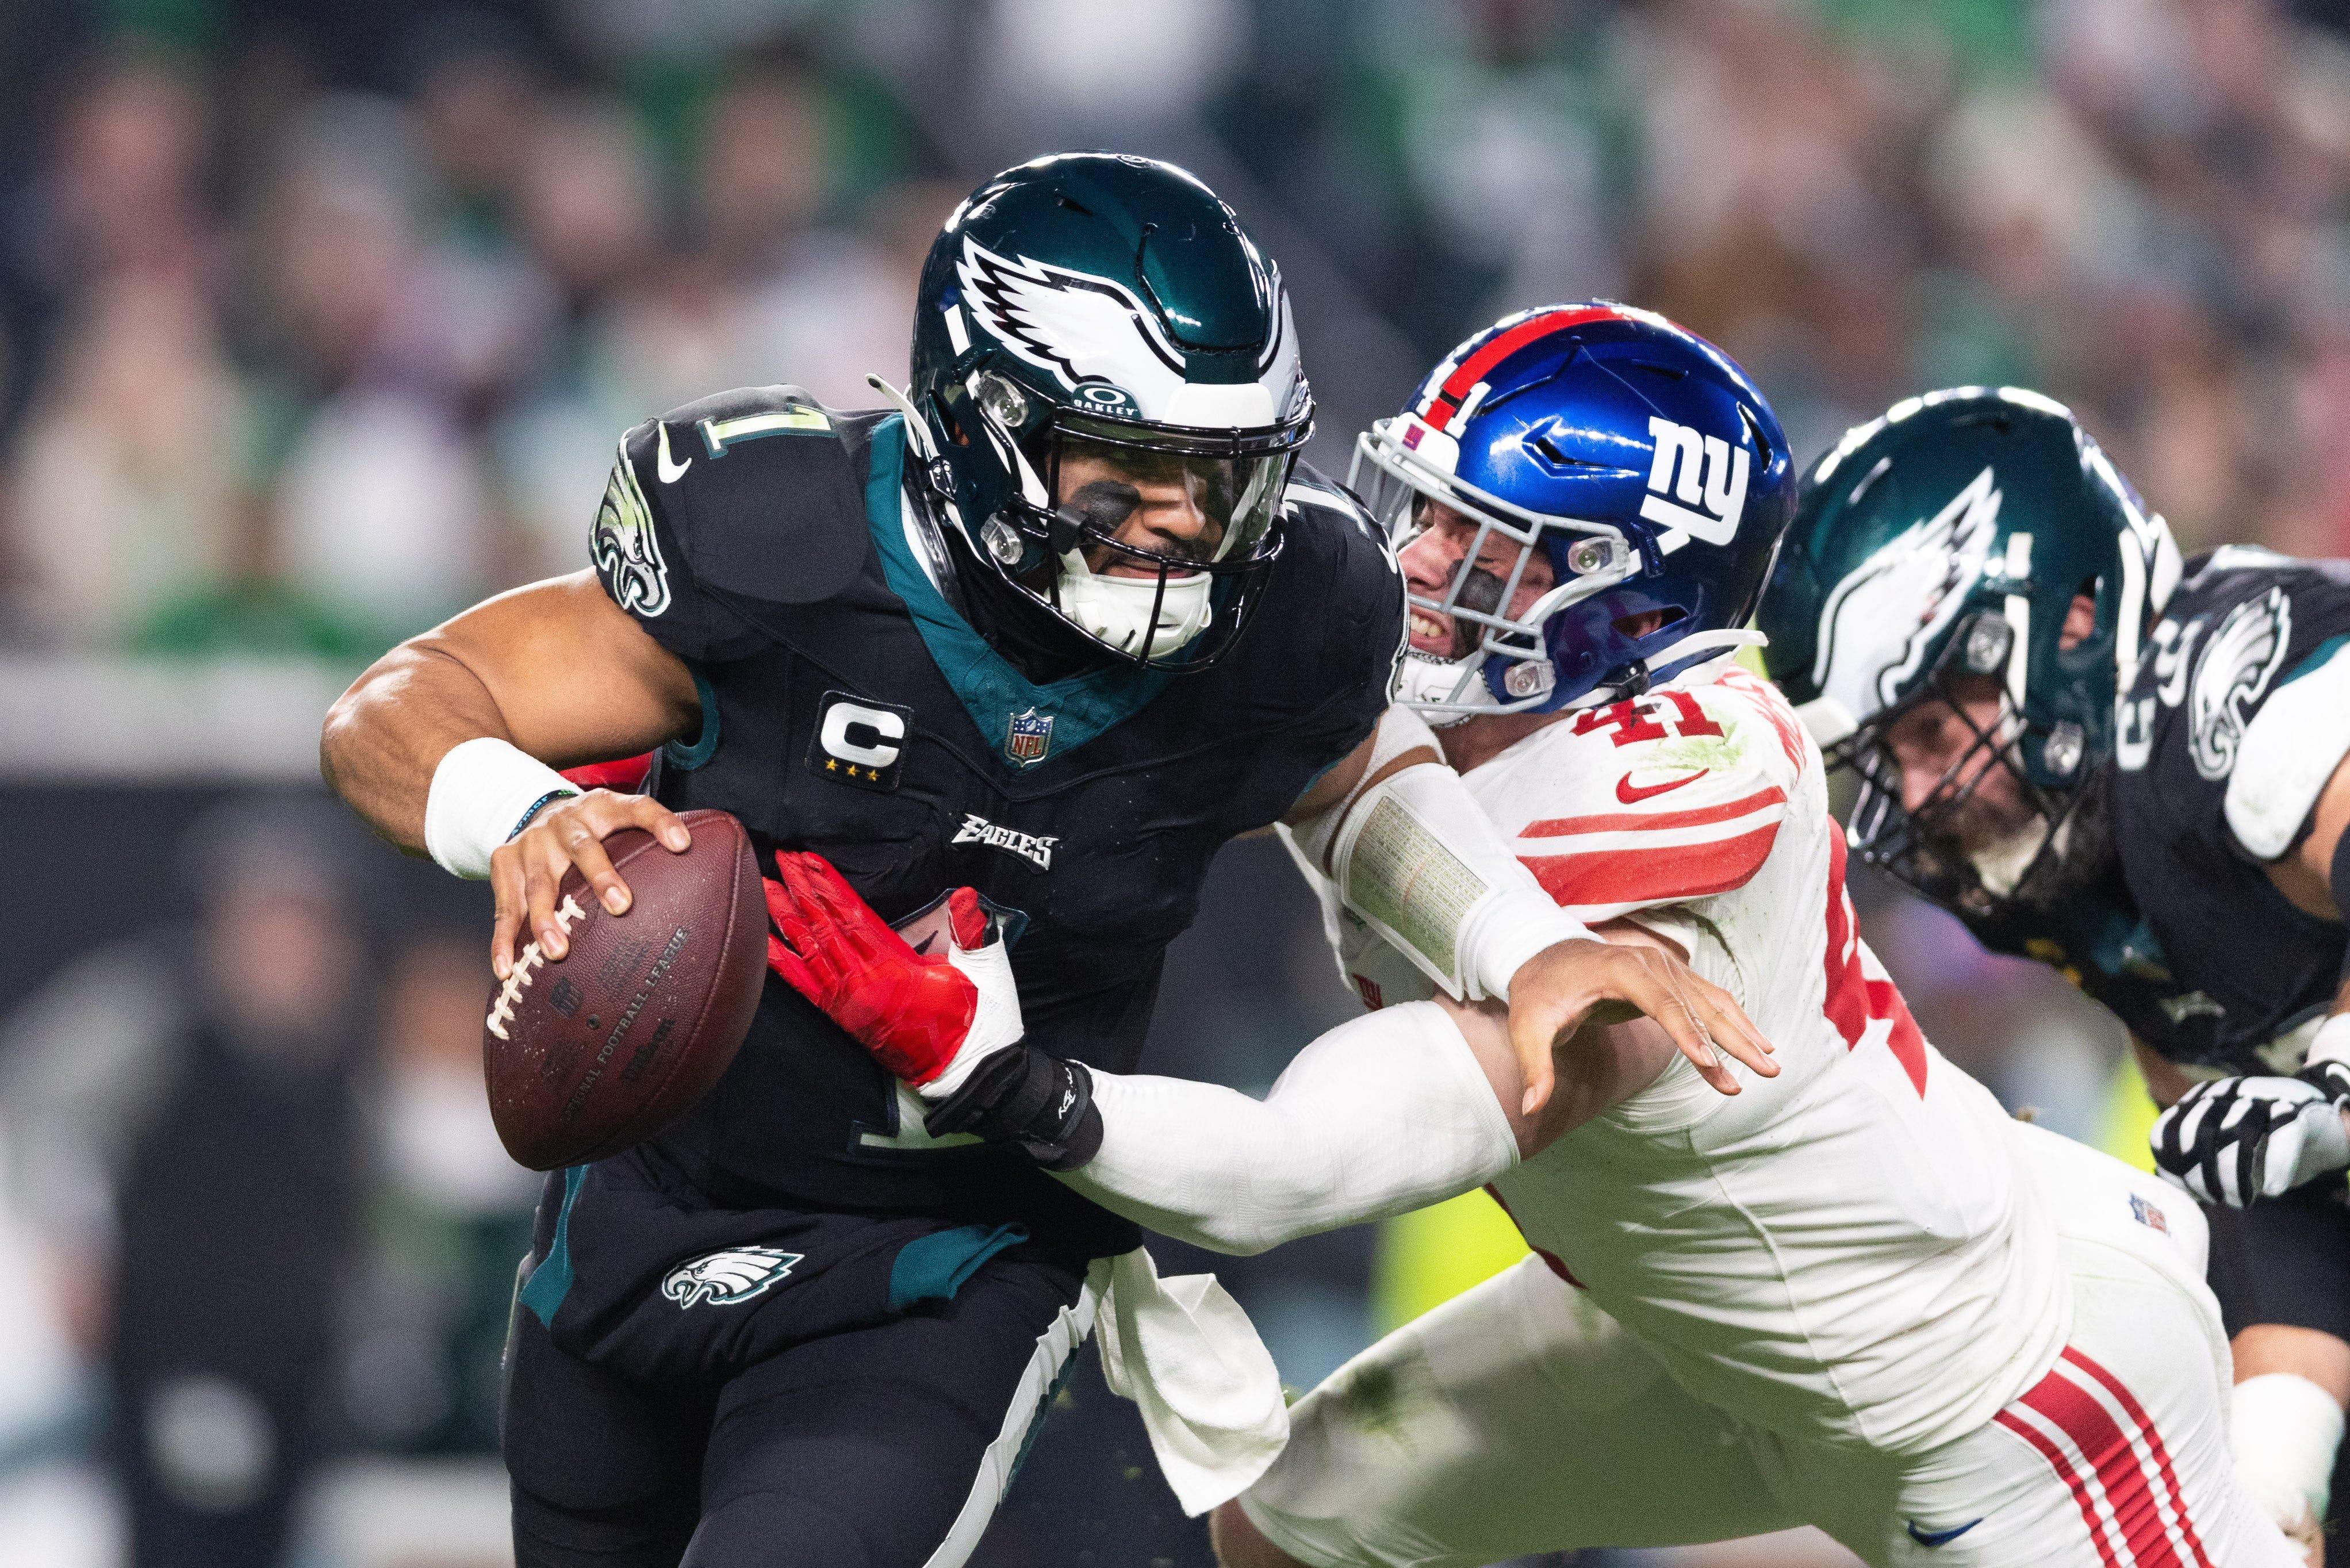 Dec 25, 2023; Philadelphia, Pennsylvania, USA; Philadelphia Eagles quarterback Jalen Hurts (1) eludes the tackle attempt of New York Giants linebacker Micah McFadden (41) during the second quarter at Lincoln Financial Field. Mandatory Credit: Bill Streicher-USA TODAY Sports